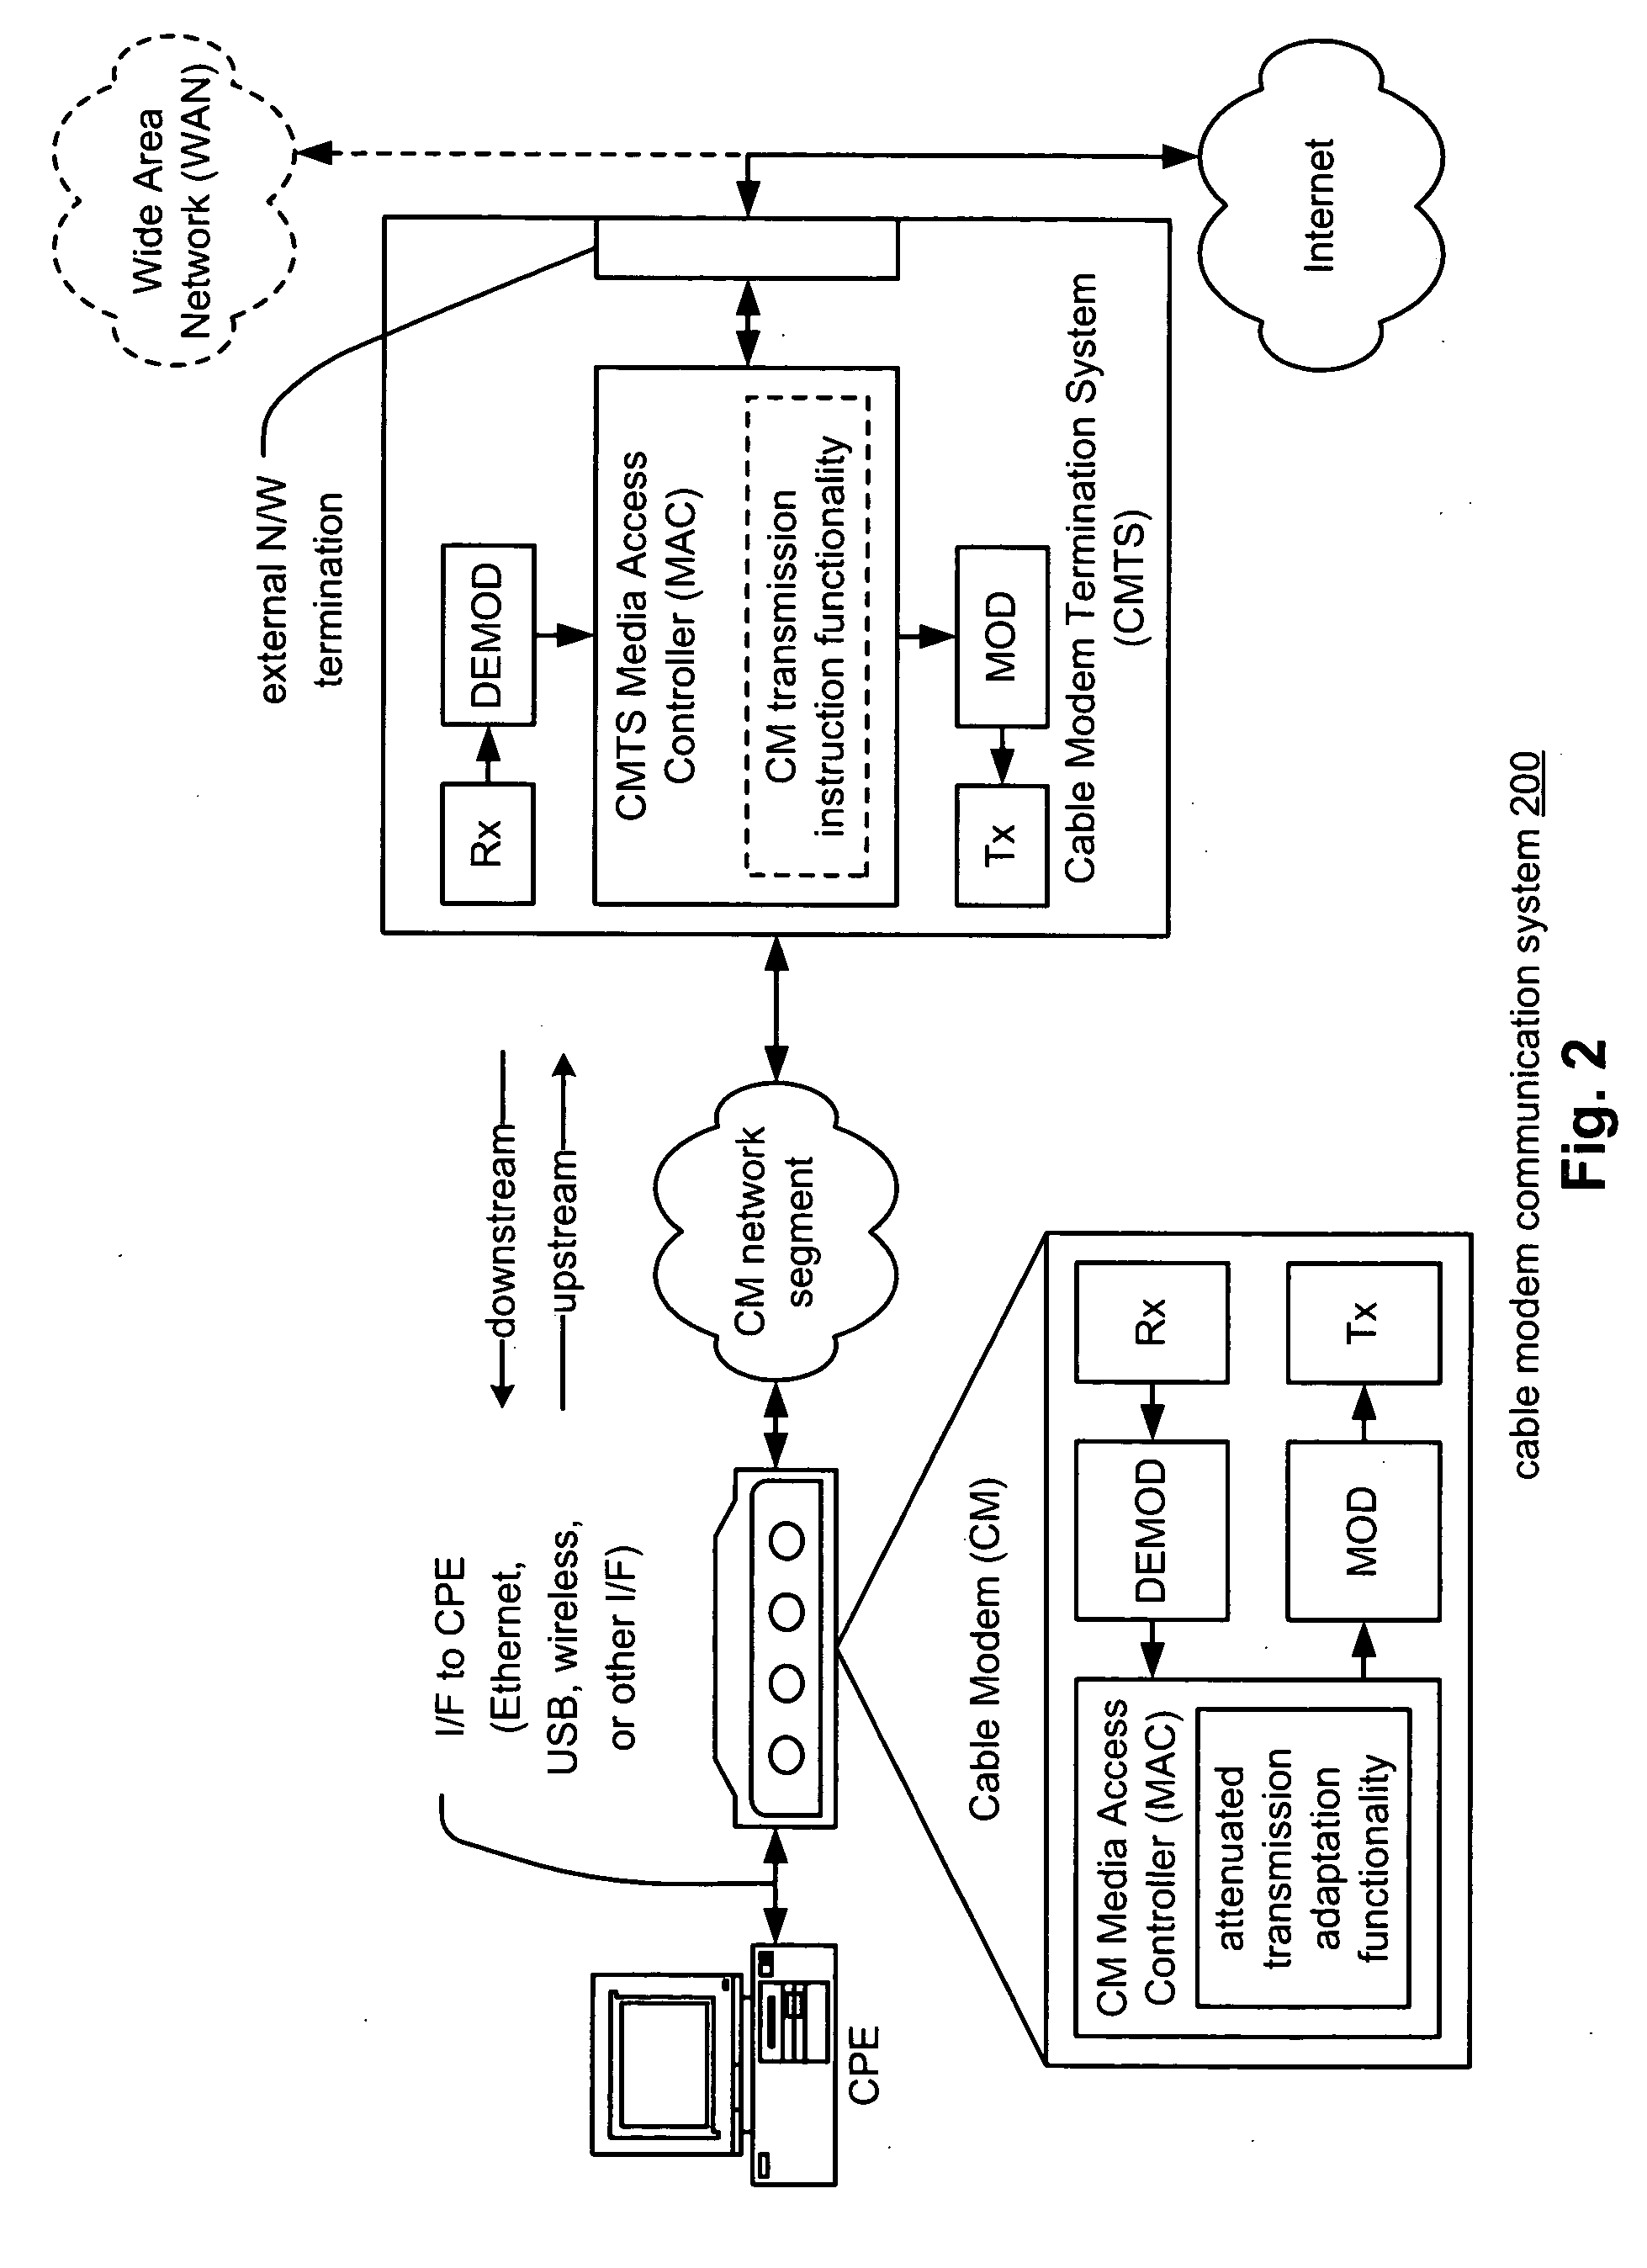 Ranging and registering cable modems under attenuated transmission conditions